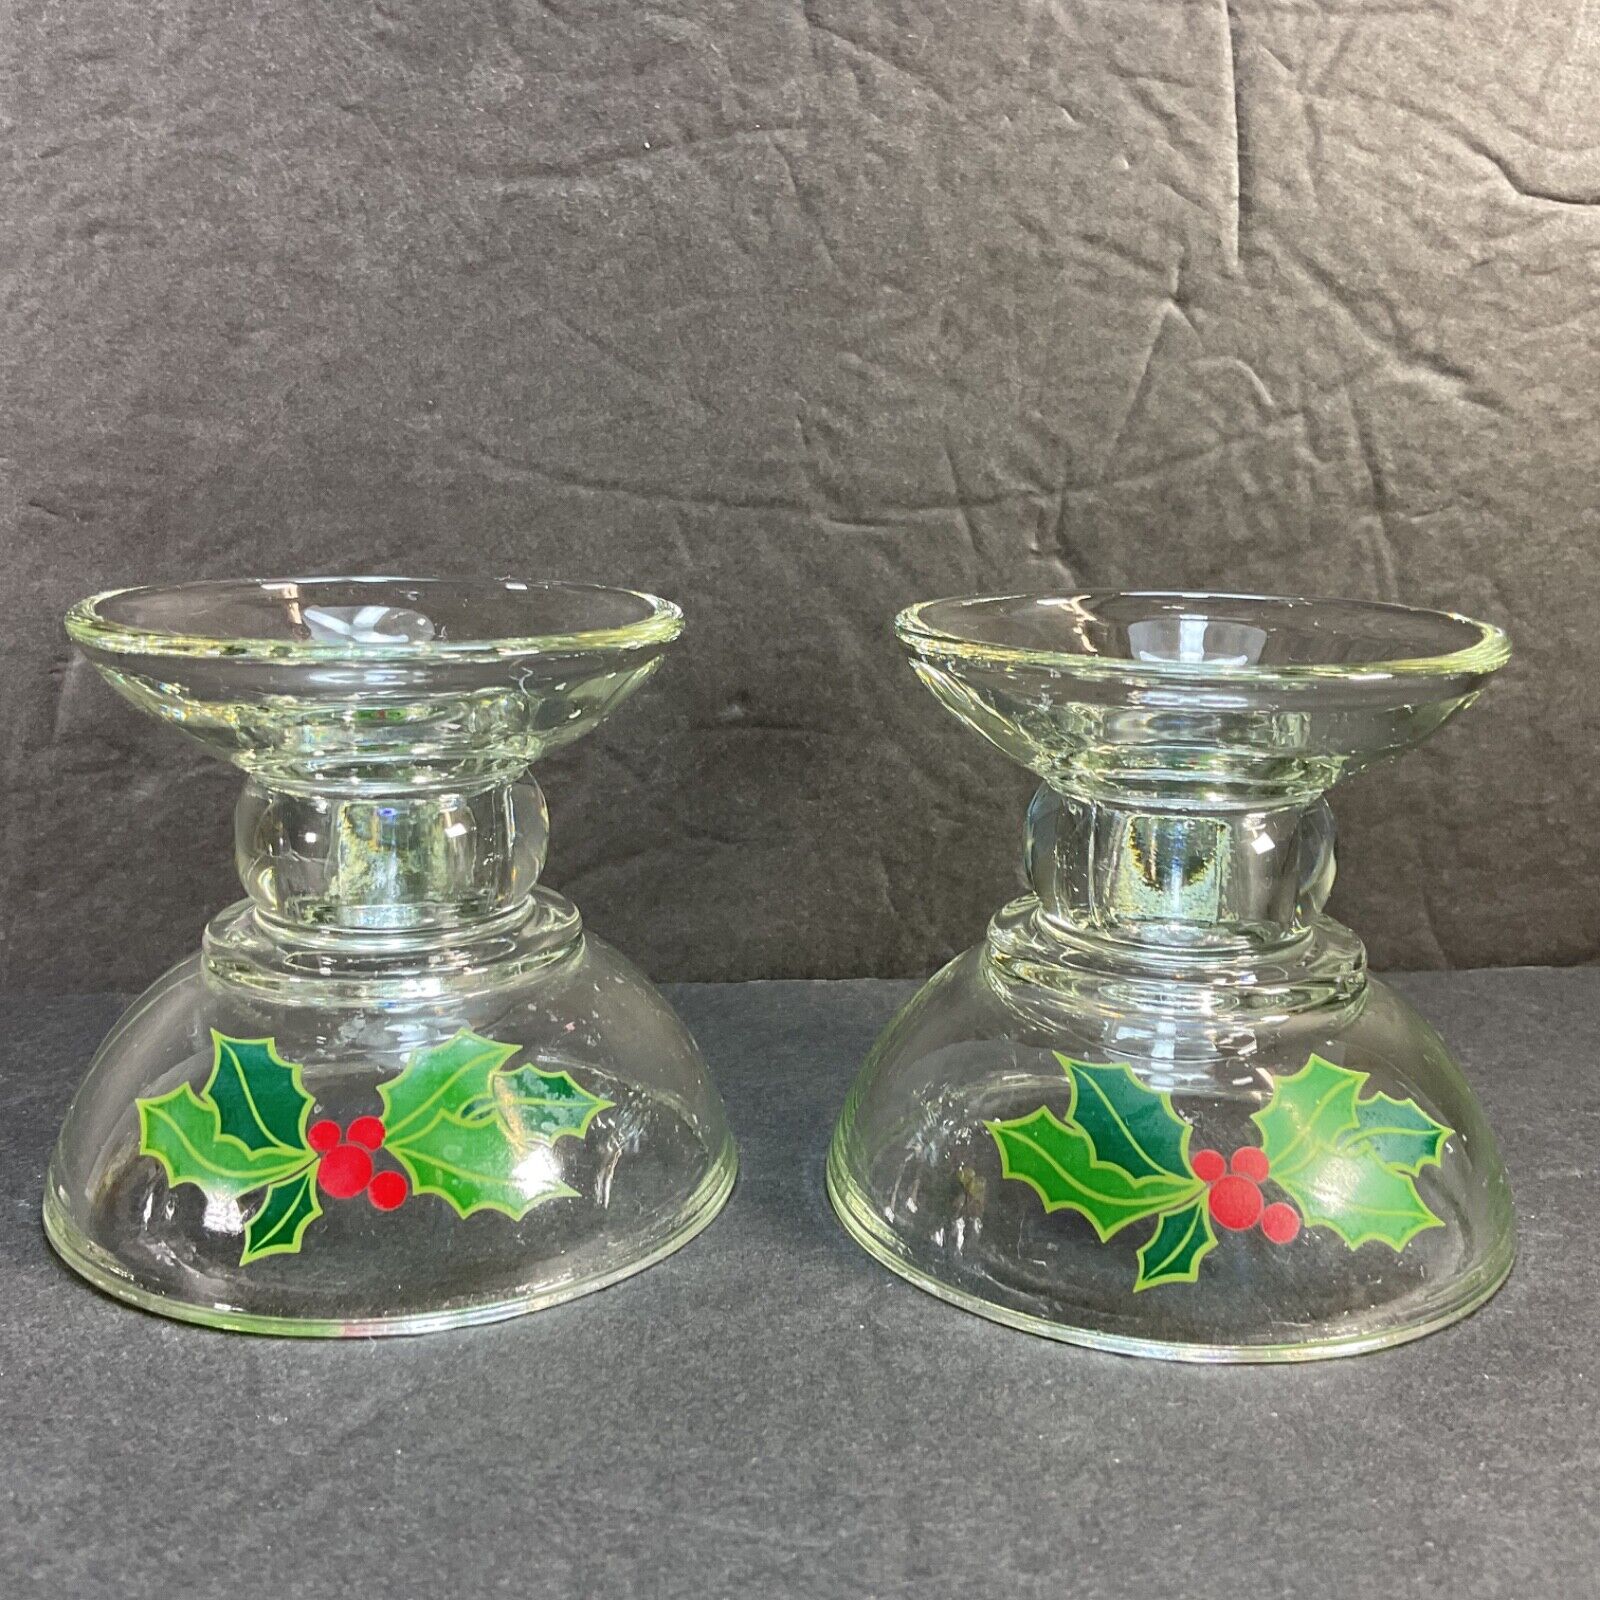 Vintage 1981 Avon Holiday Hostess Collection Pair of Candlesticks Holders Holly